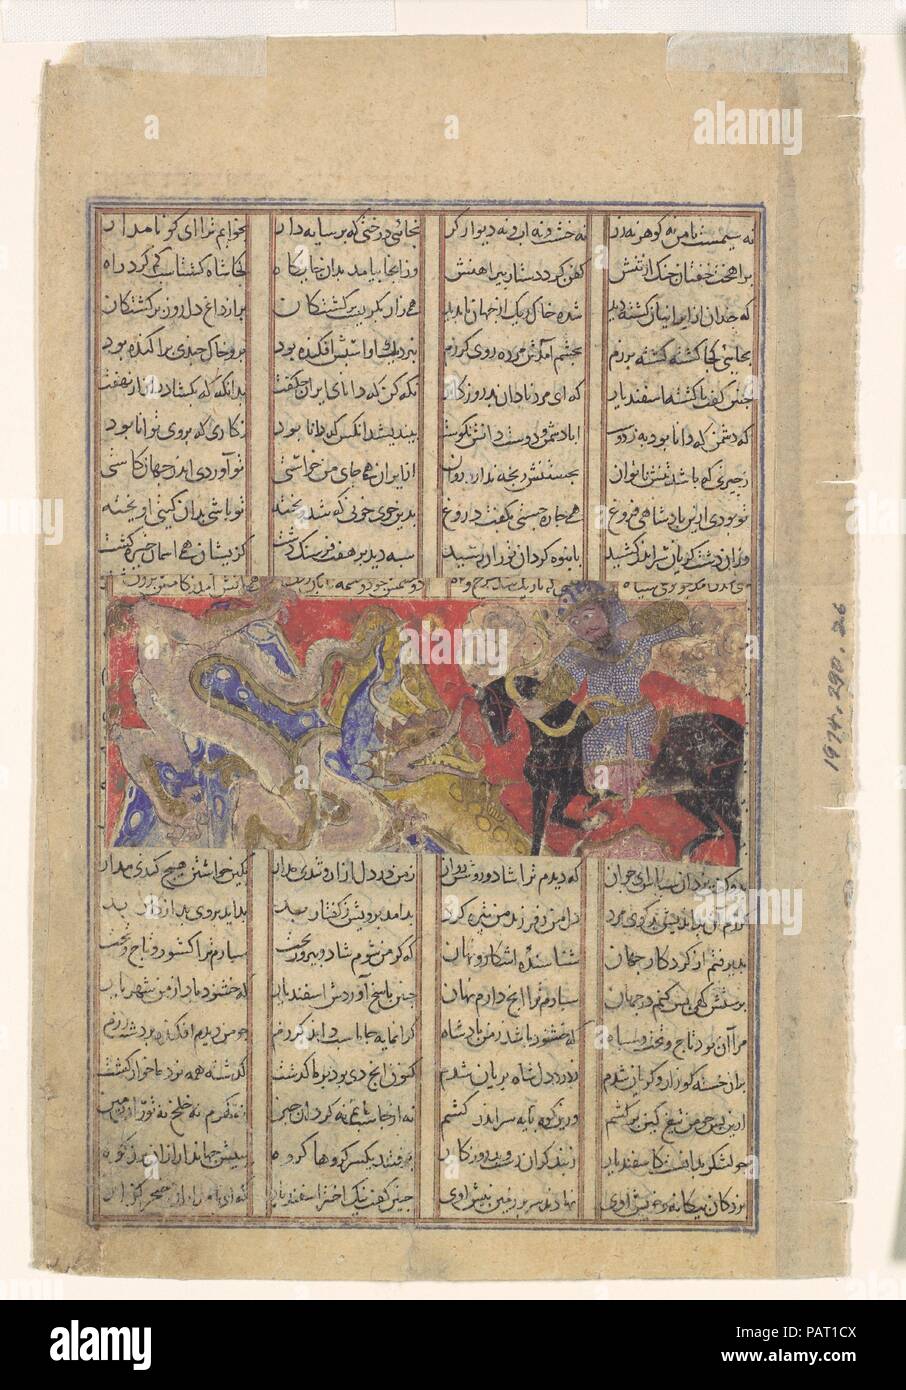 'Isfandiyar's Third Course: He Slays a Dragon', Folio from a Shahnama (Book of Kings). Author: Abu'l Qasim Firdausi (935-1020). Dimensions: Page: 8 1/8 x 5 1/4 in. (20.6 x 13.4 cm)  Painting: 1 5/8 x 4 3/16 in. (4.2 x 10.6 cm). Date: ca. 1330-40.  The painting, showing Isfandiyar about to kill a dragon with bow and arrow in a conventional man-against-beast pose, depicts the last part of this episode in which the hero first weakens the animal with swords sticking out of a carriage he had built. It is a true fusion of influences: the mountain peaks and red background point to Injuid painting, wh Stock Photo